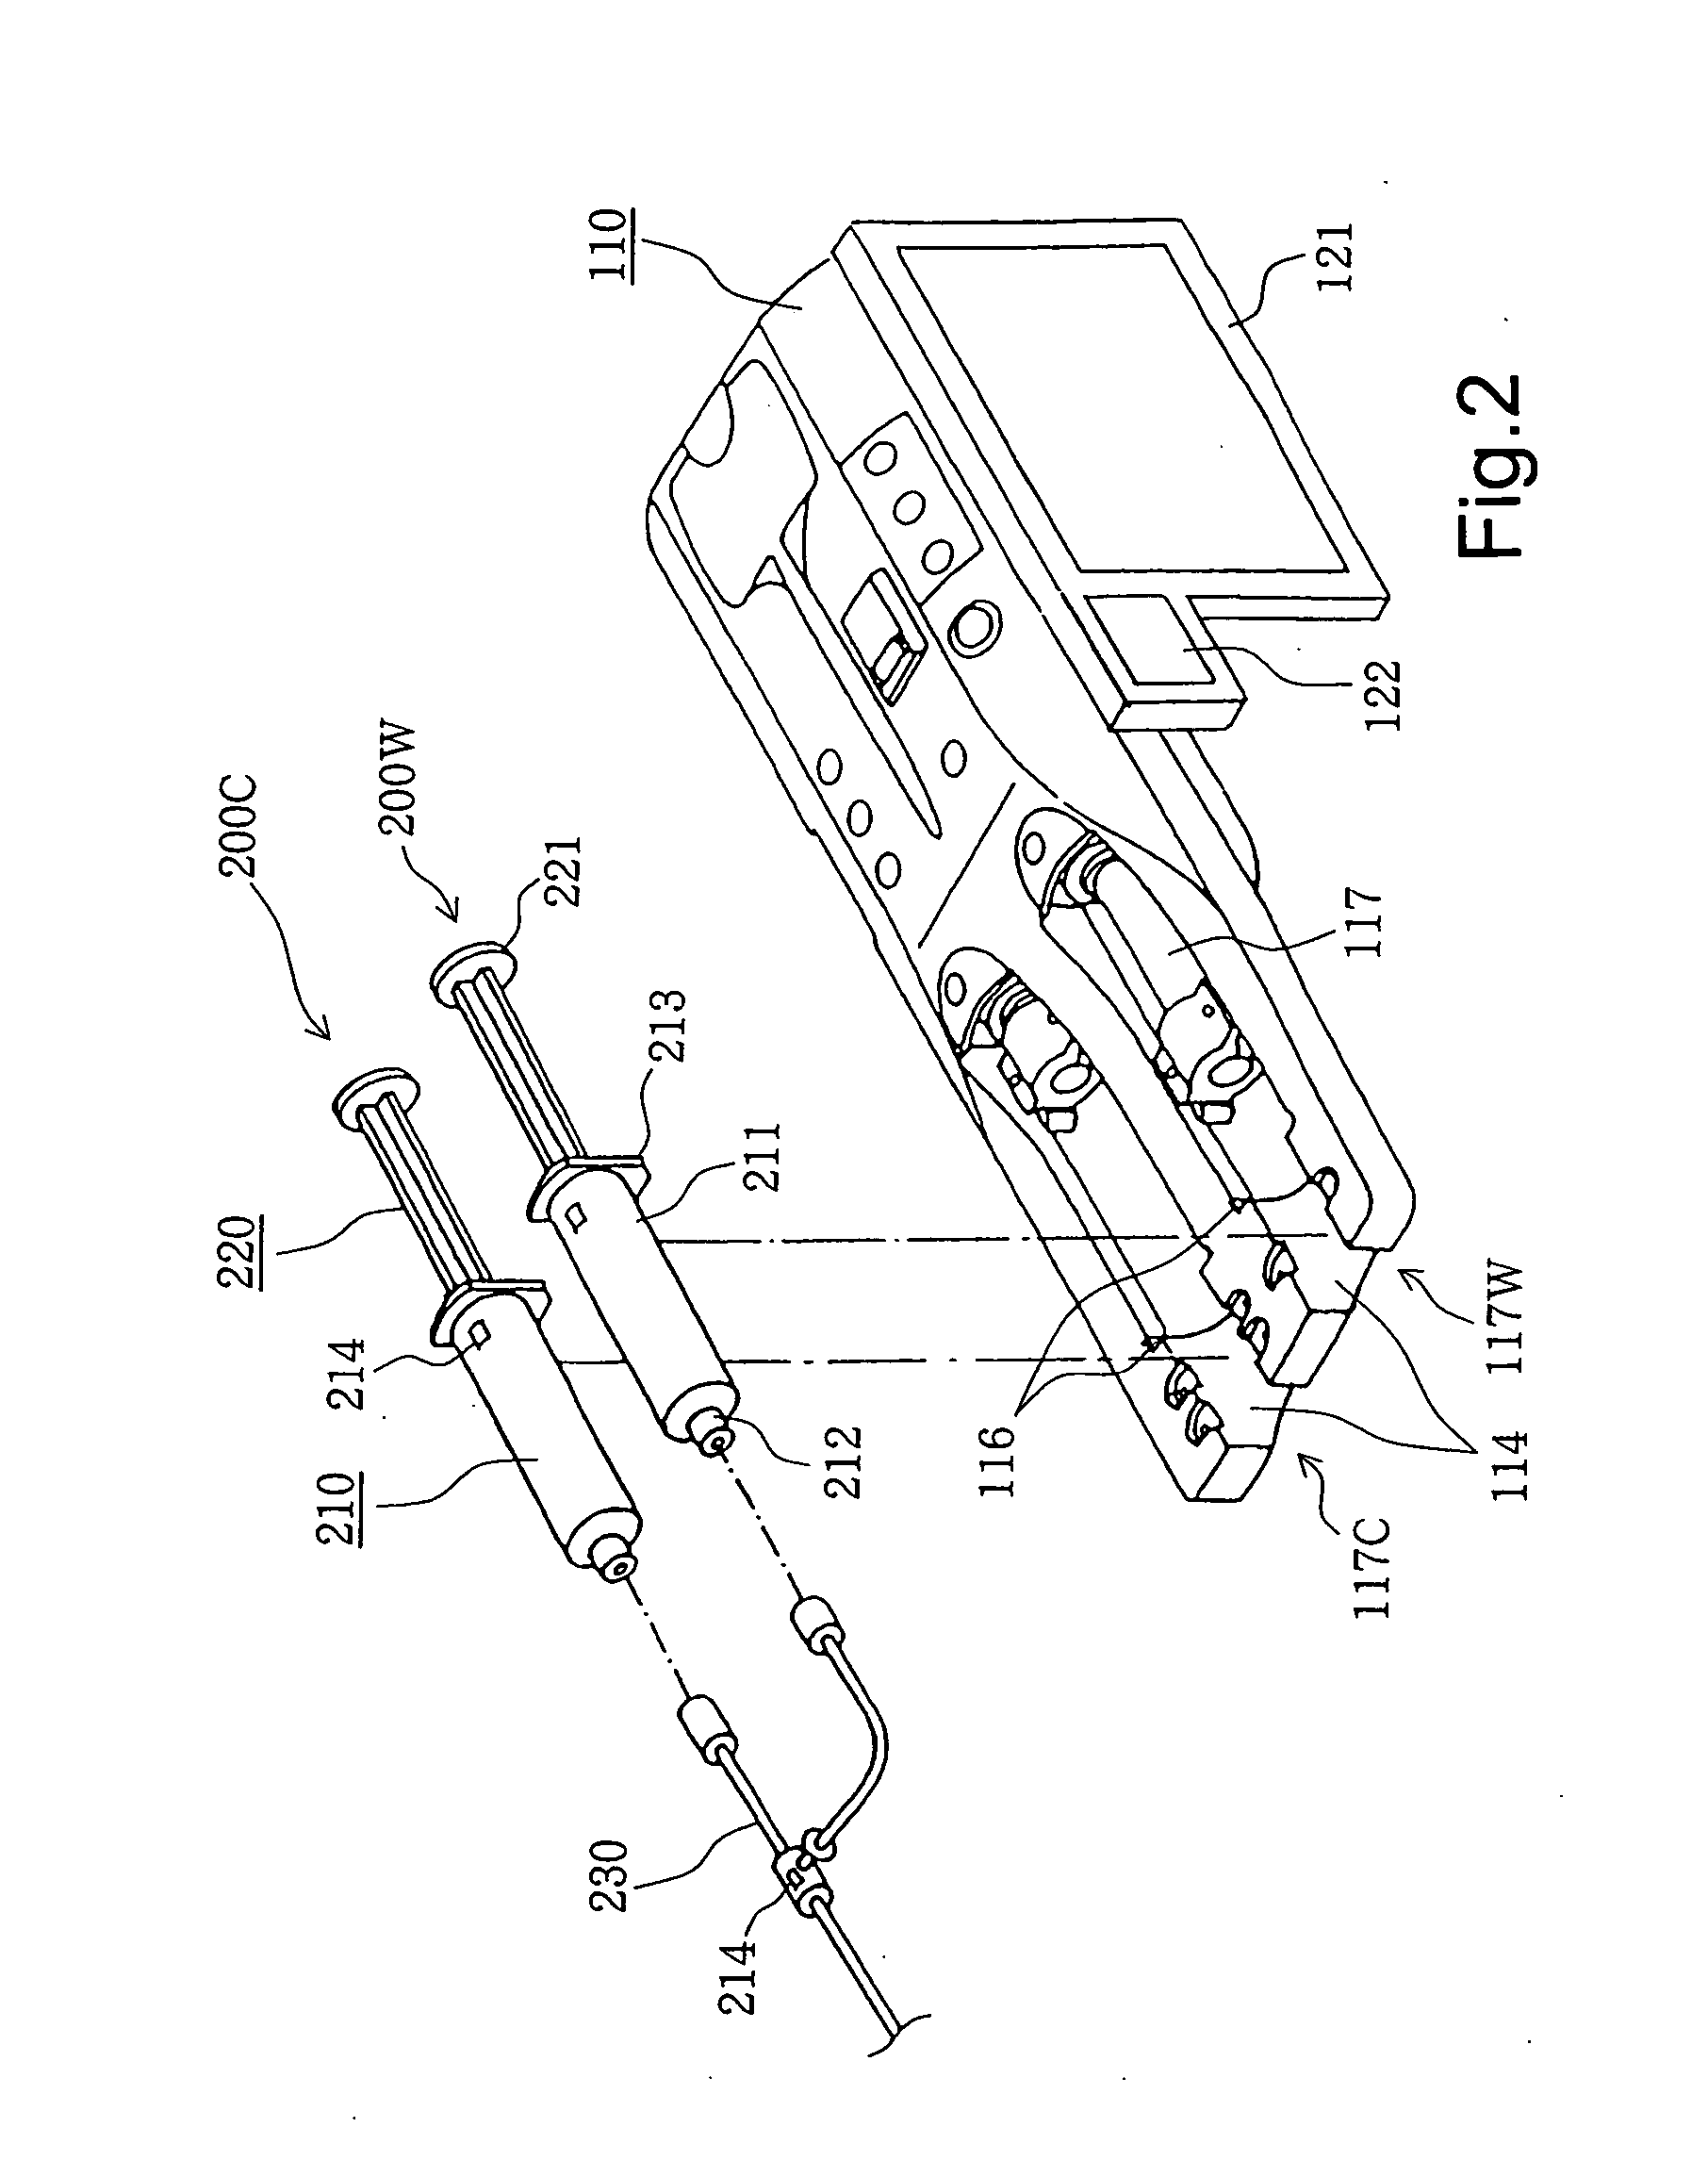 Liquid injection system having liquid injector capable of optically reading two-dimensional code assigned to liquid syringe